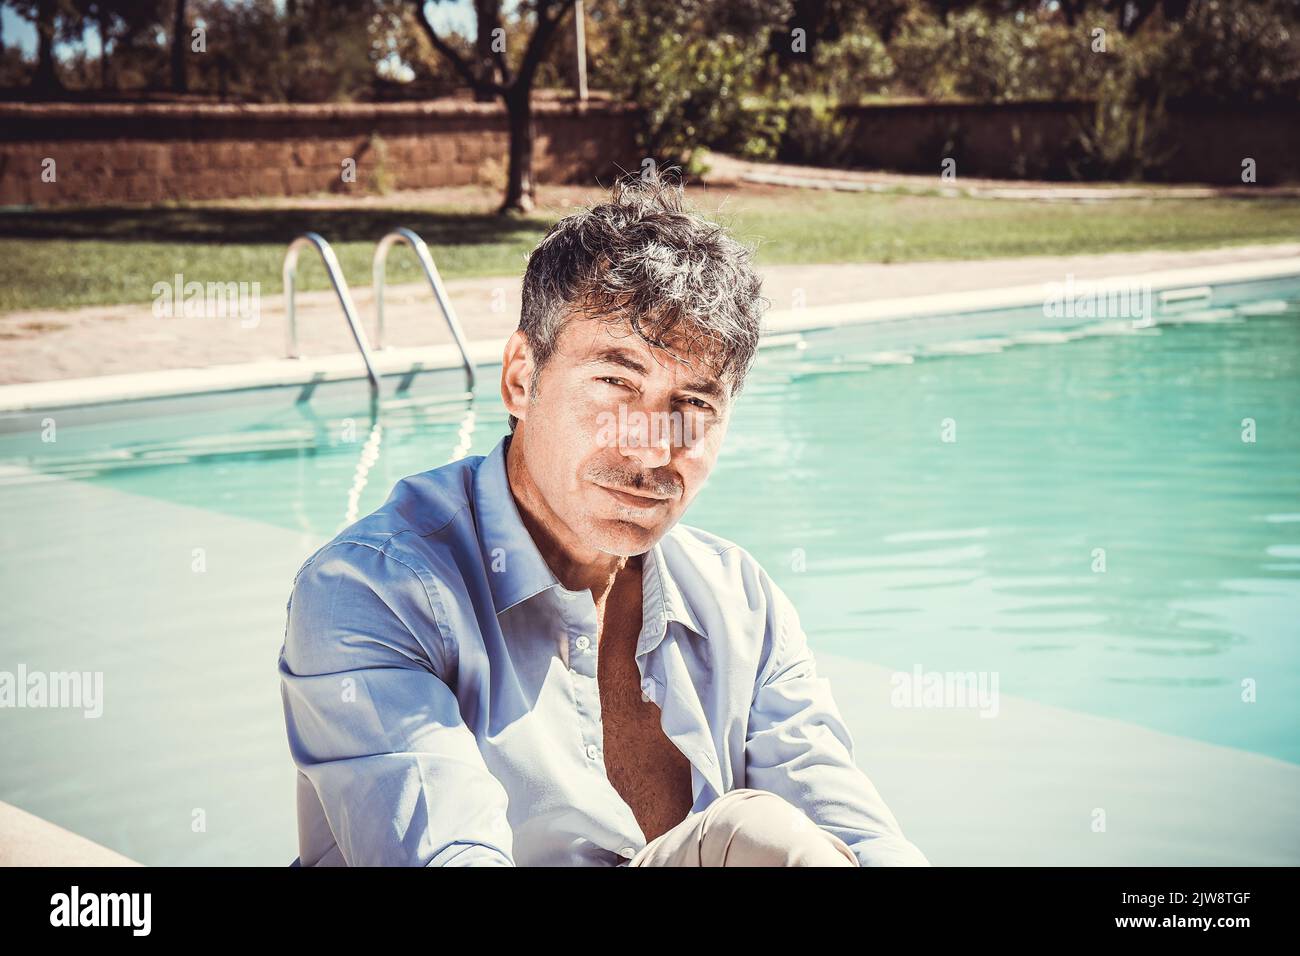 The young man is wearing sunglasses, white shirt and beige pants and is sitting by the pool. A handsome businessman takes a moment to relax by the poo Stock Photo